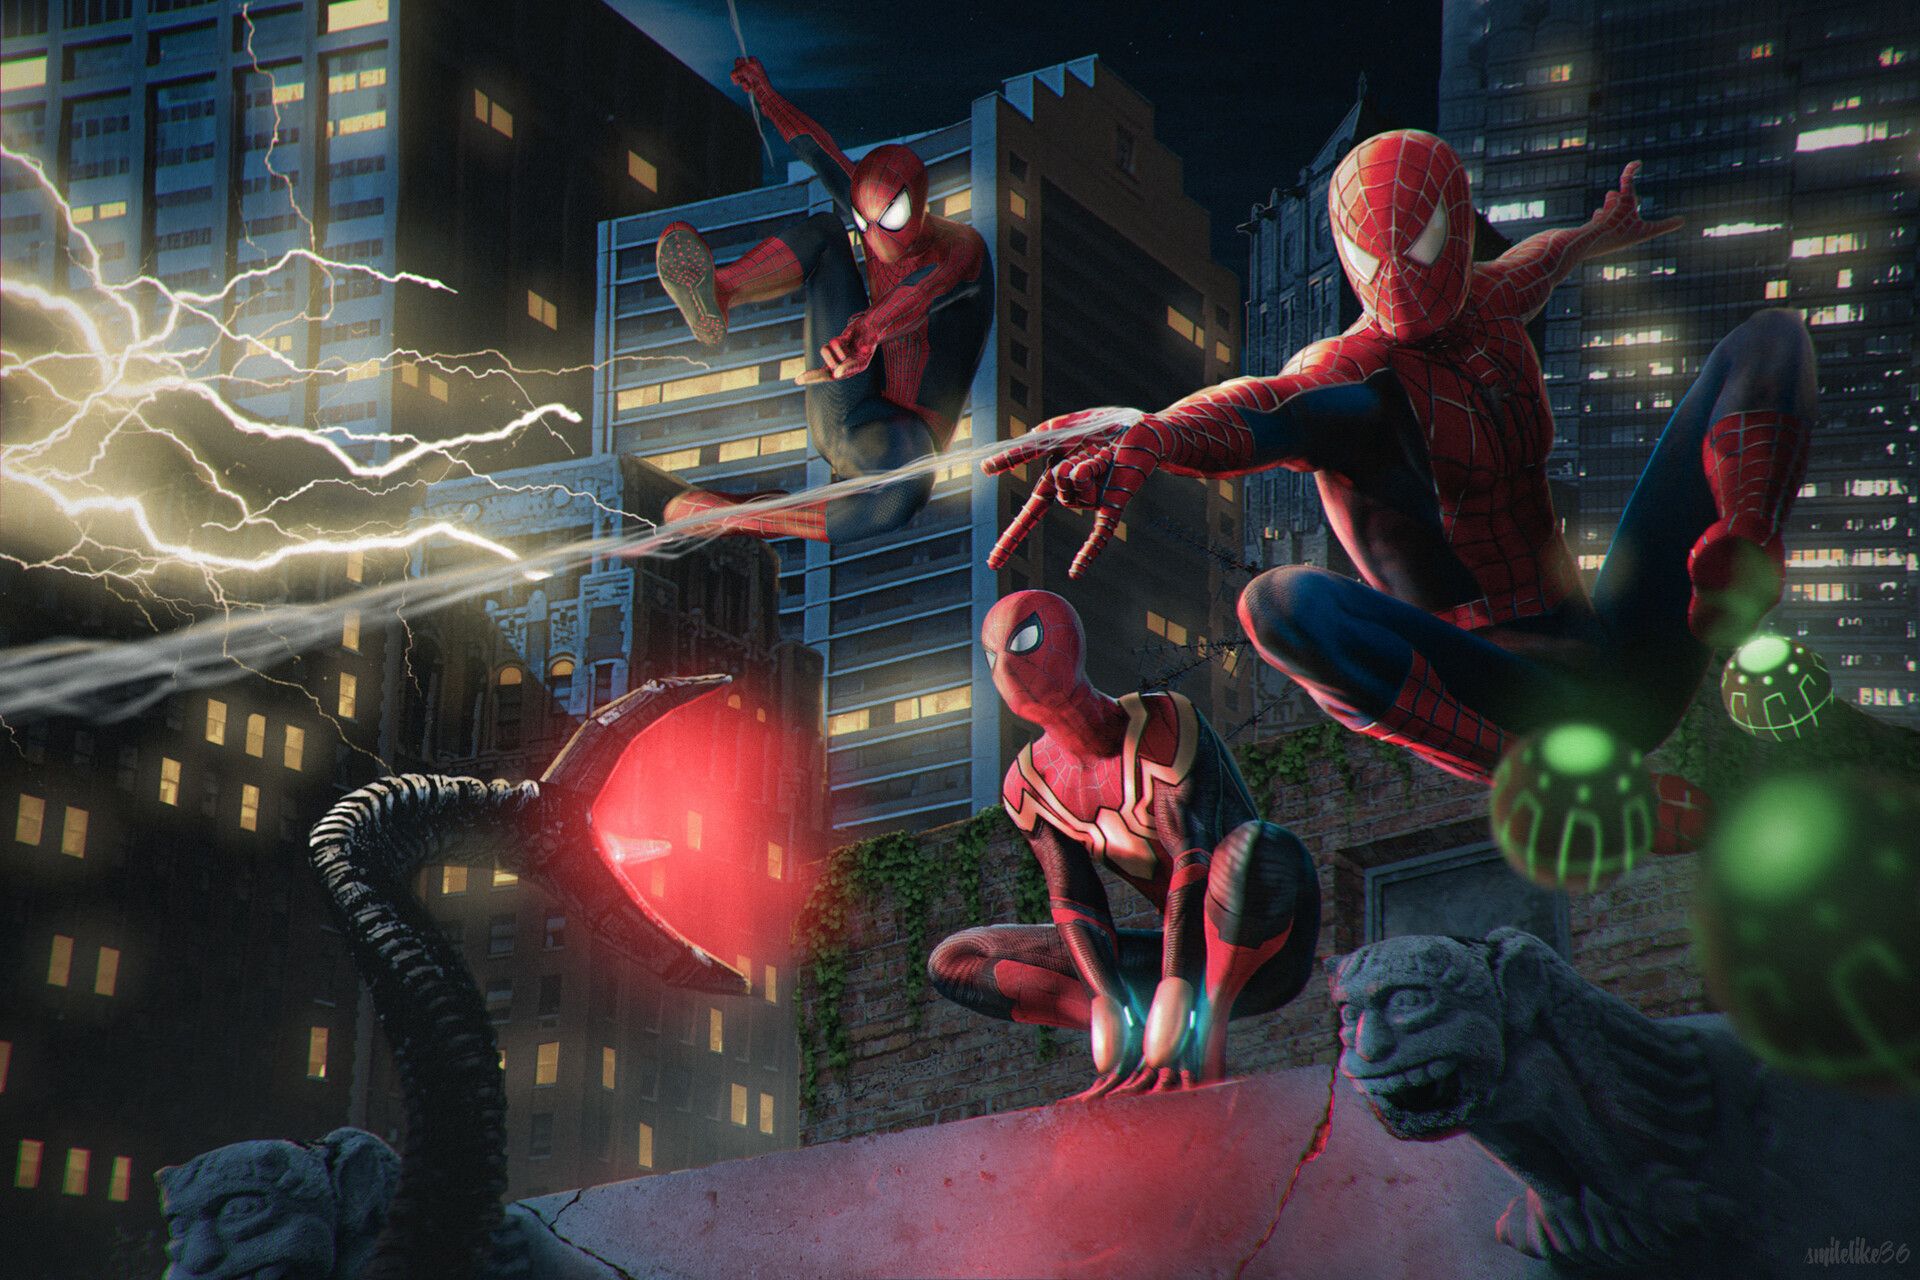 Multiple Spider Man No Way Home Wallpaper, HD Movies 4K Wallpaper, Image, Photo And Background Den. Spiderman, Spiderman Electro, Marvel Spiderman Art